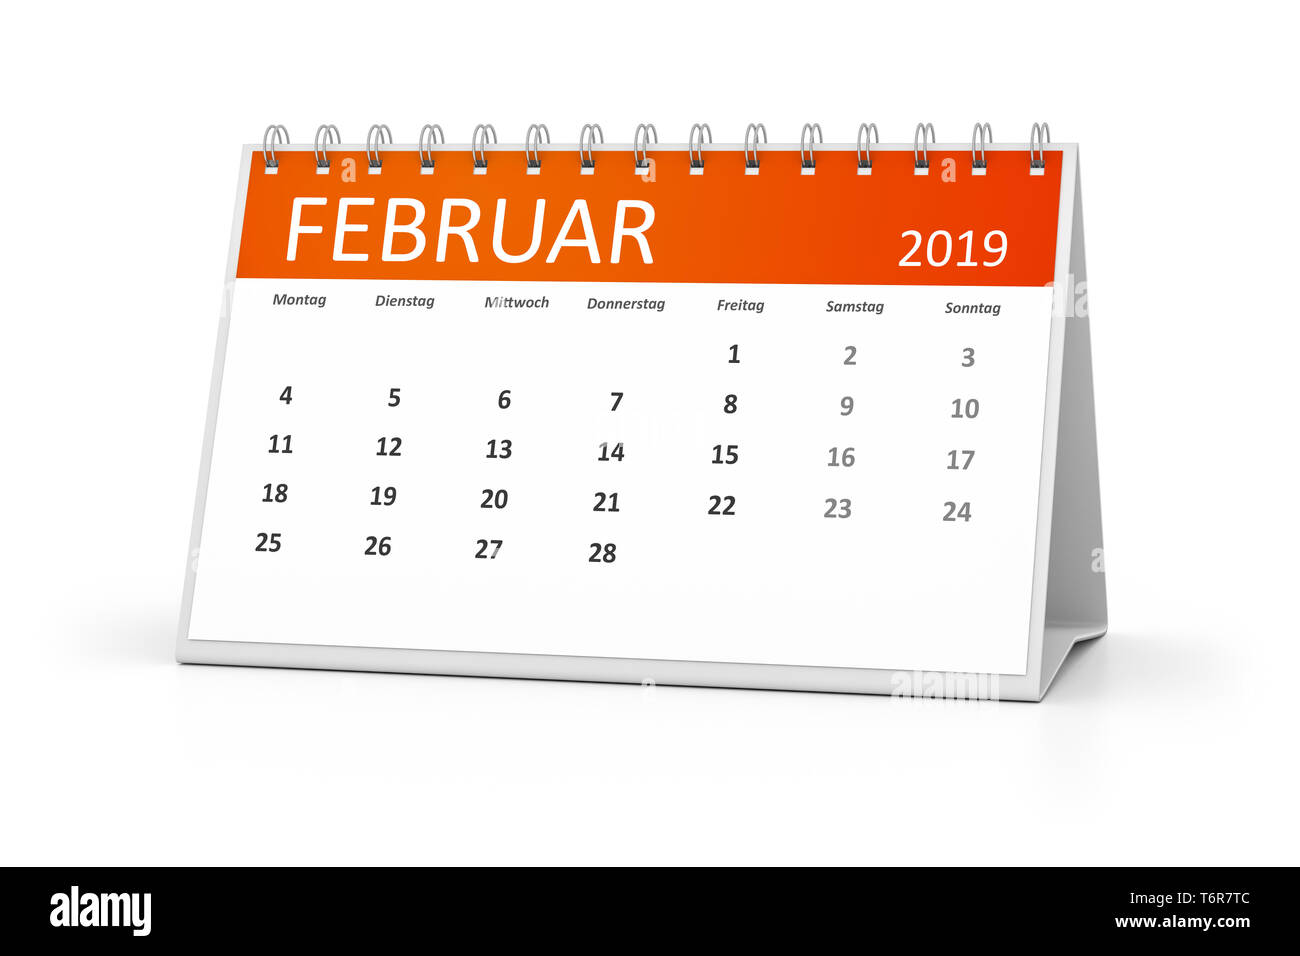 February Calendar 2019 High Resolution Stock Photography and Images - Alamy